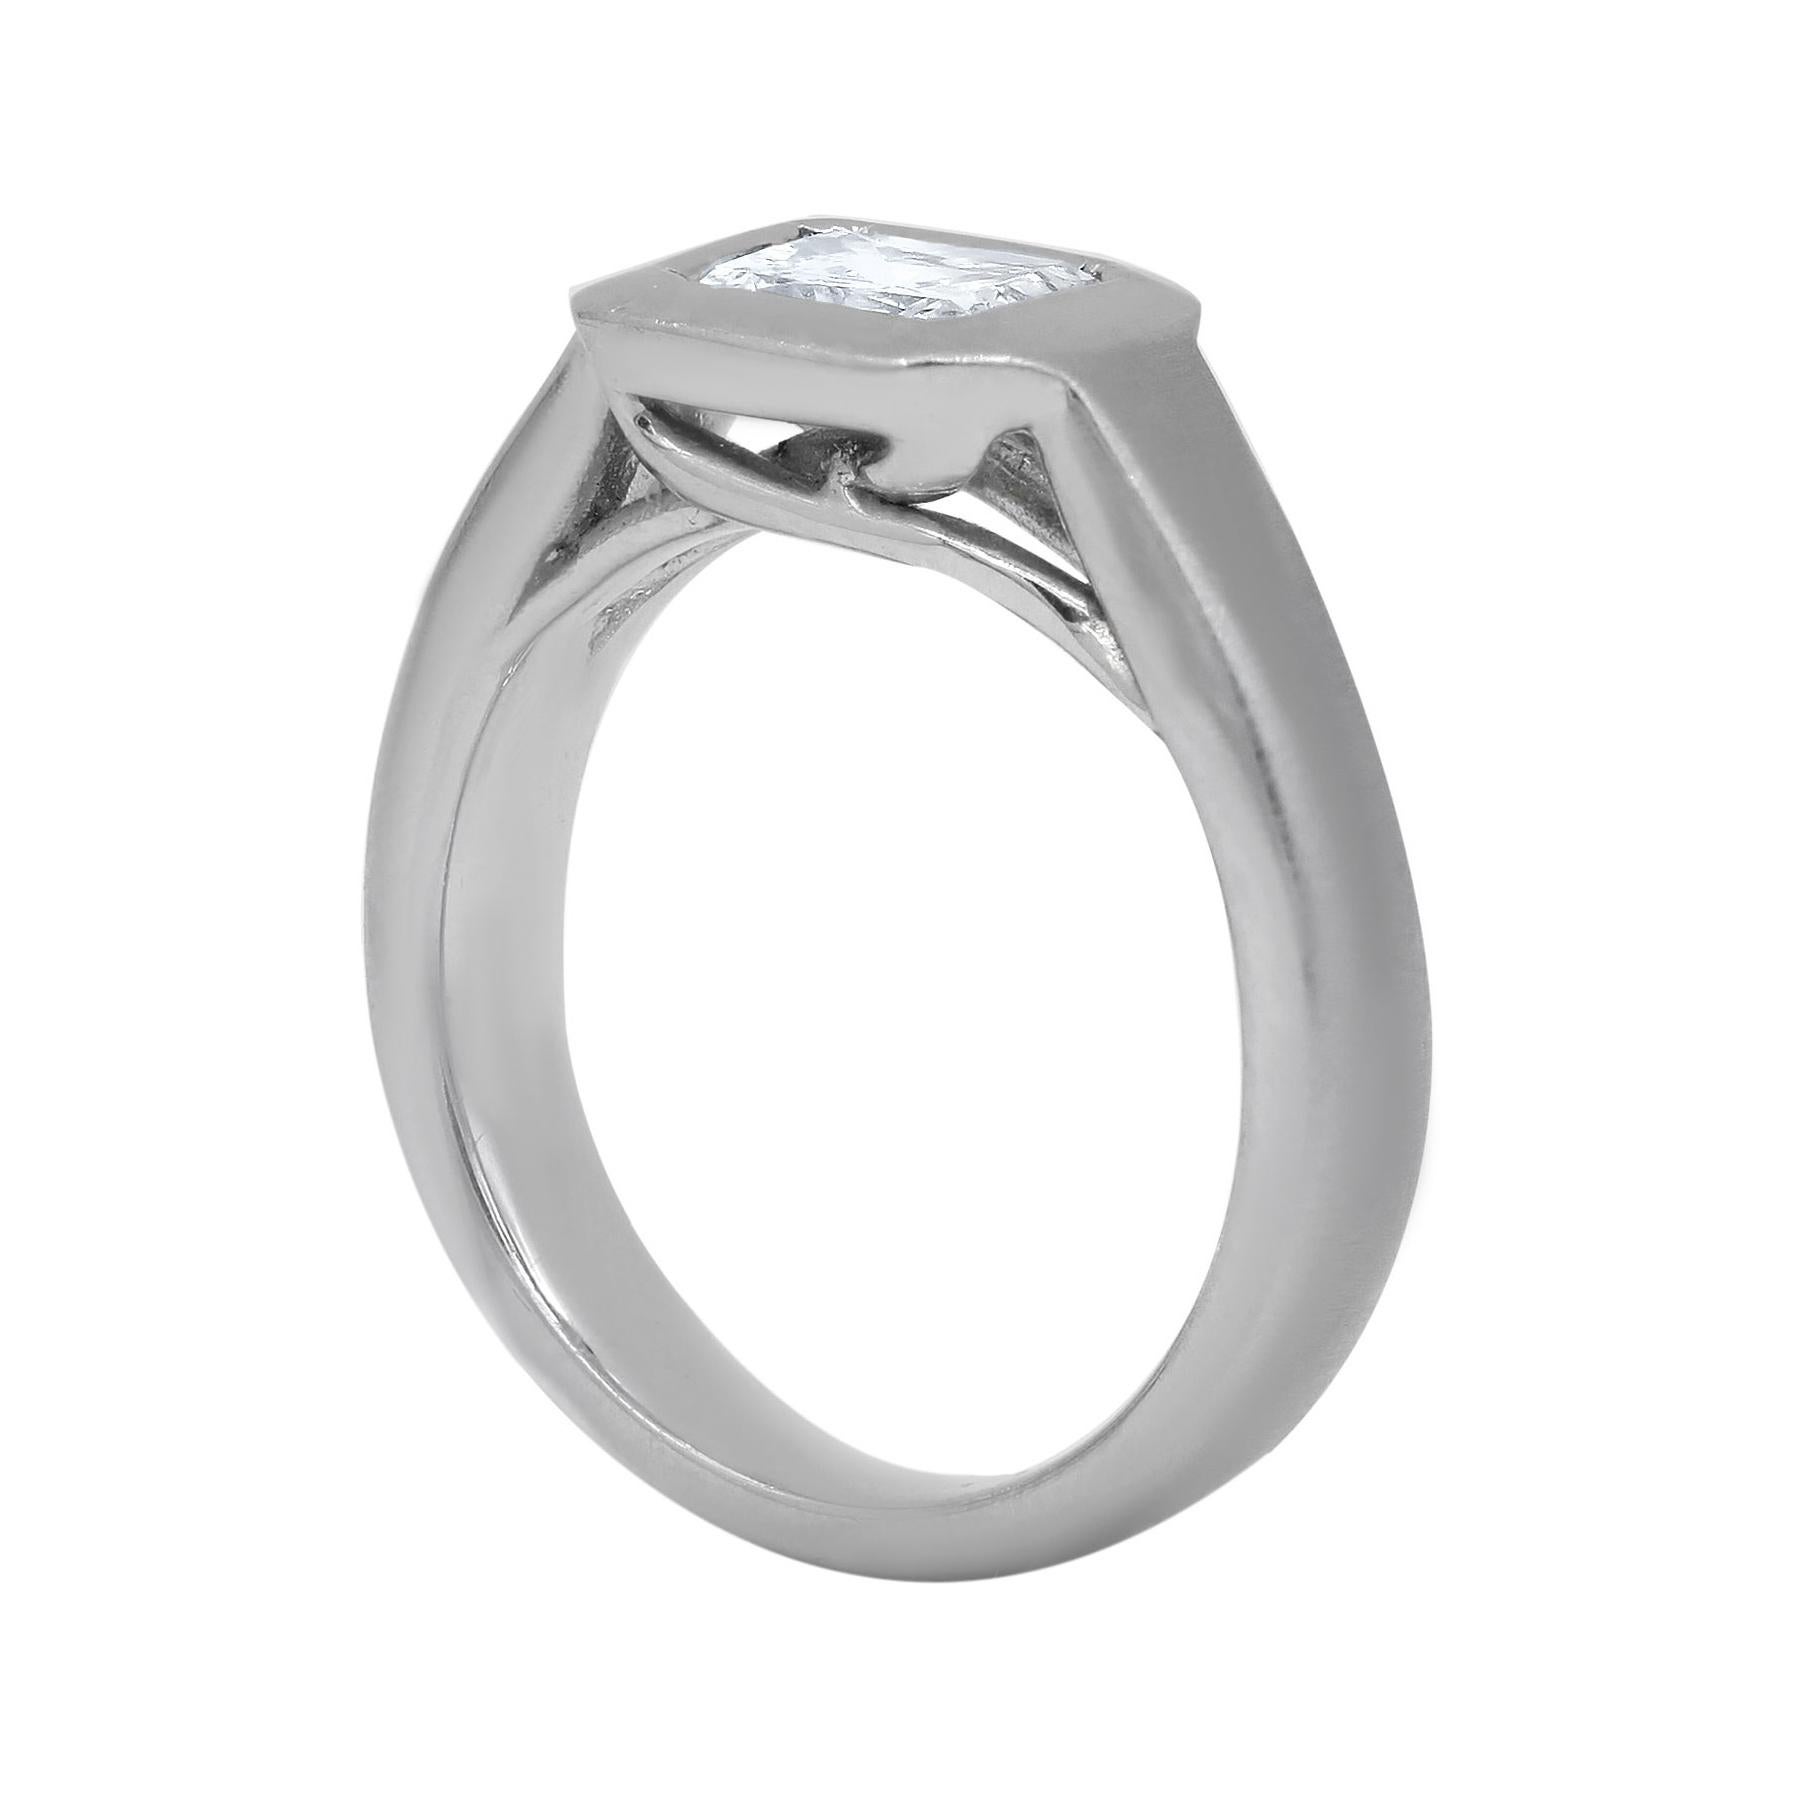 Platinum engagement band with 1.10ct radiant e-vvs1 diamond in basel setting
